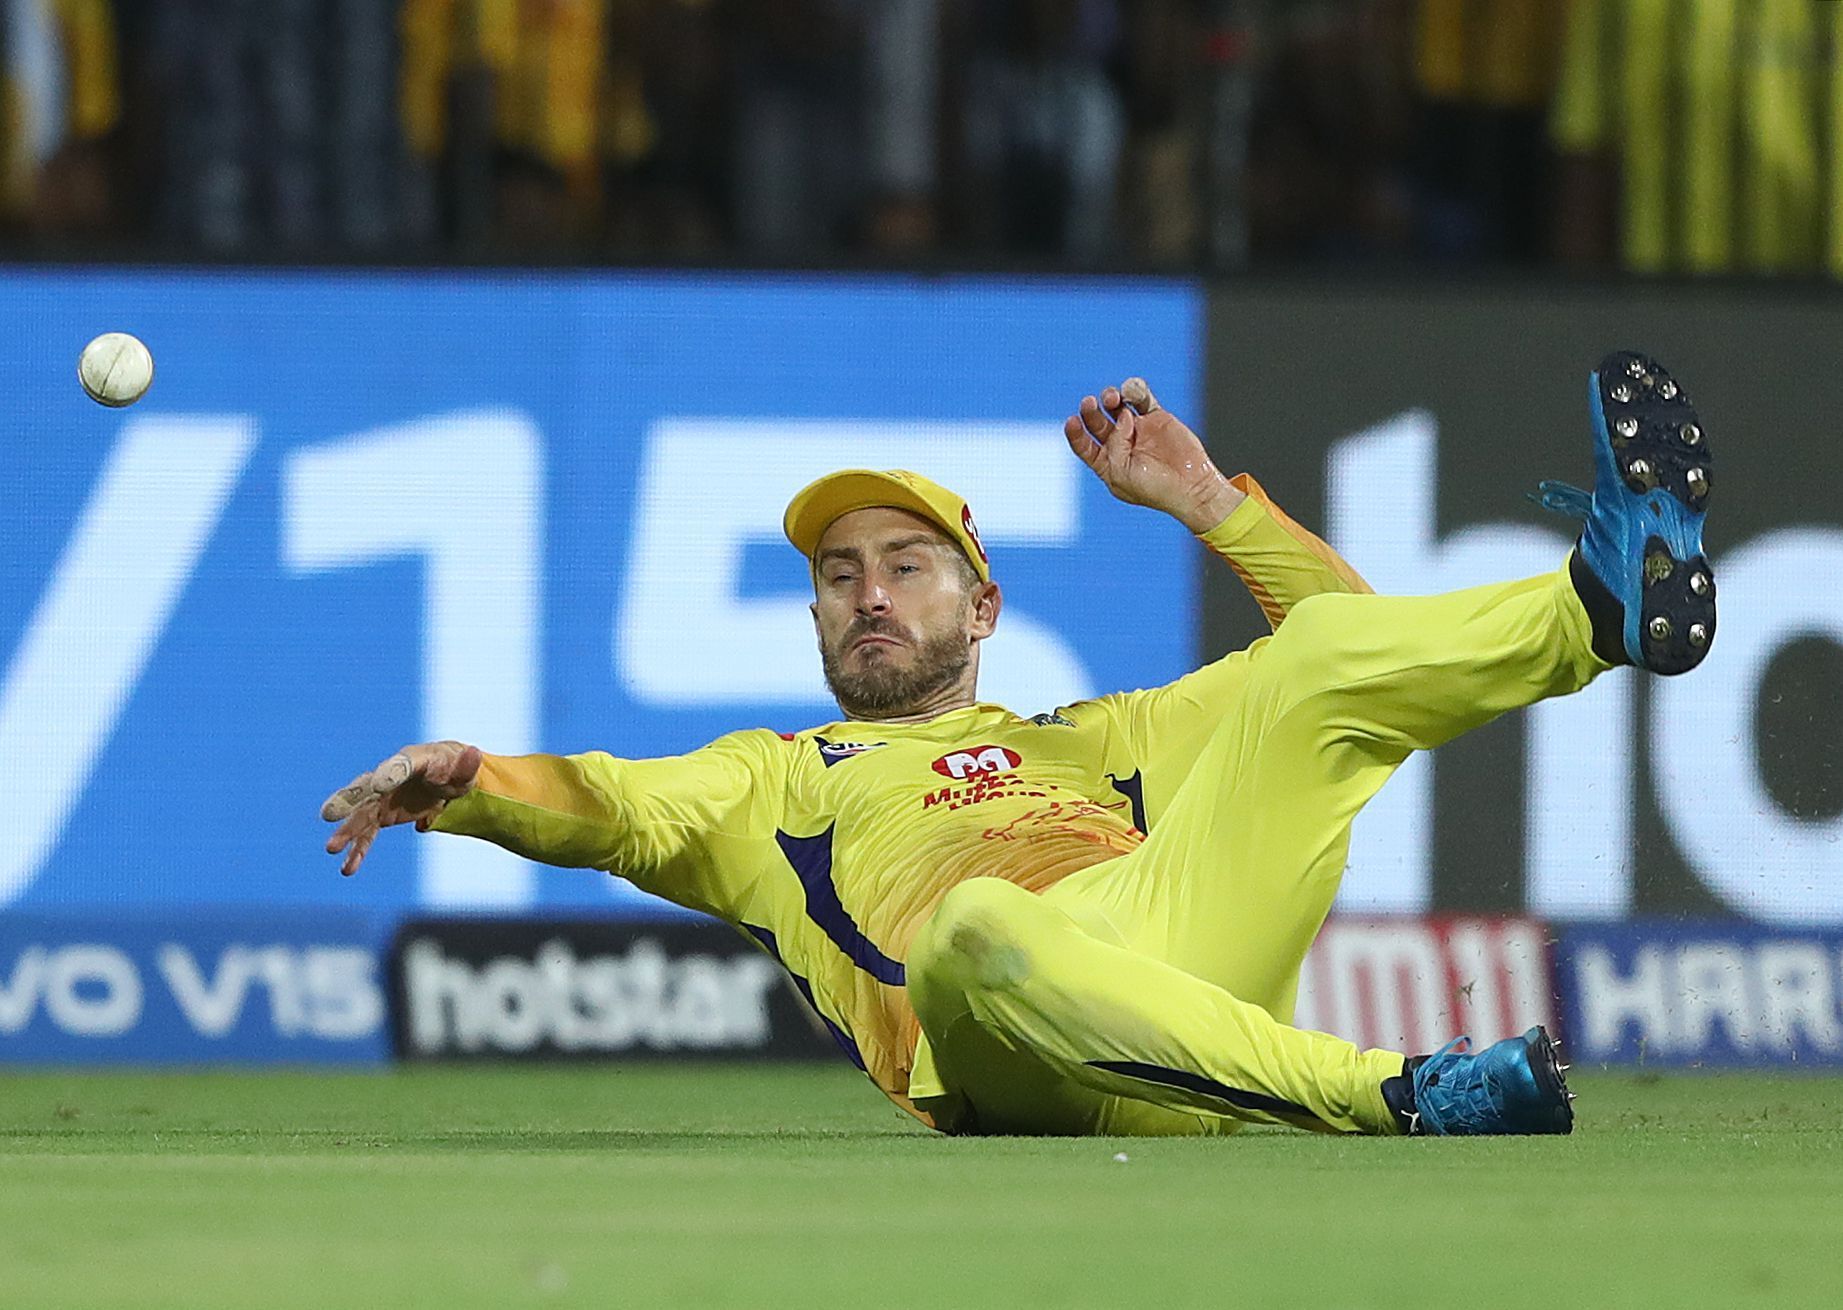 Faf du Plessis representing CSK in the IPL. Pic: Getty Images